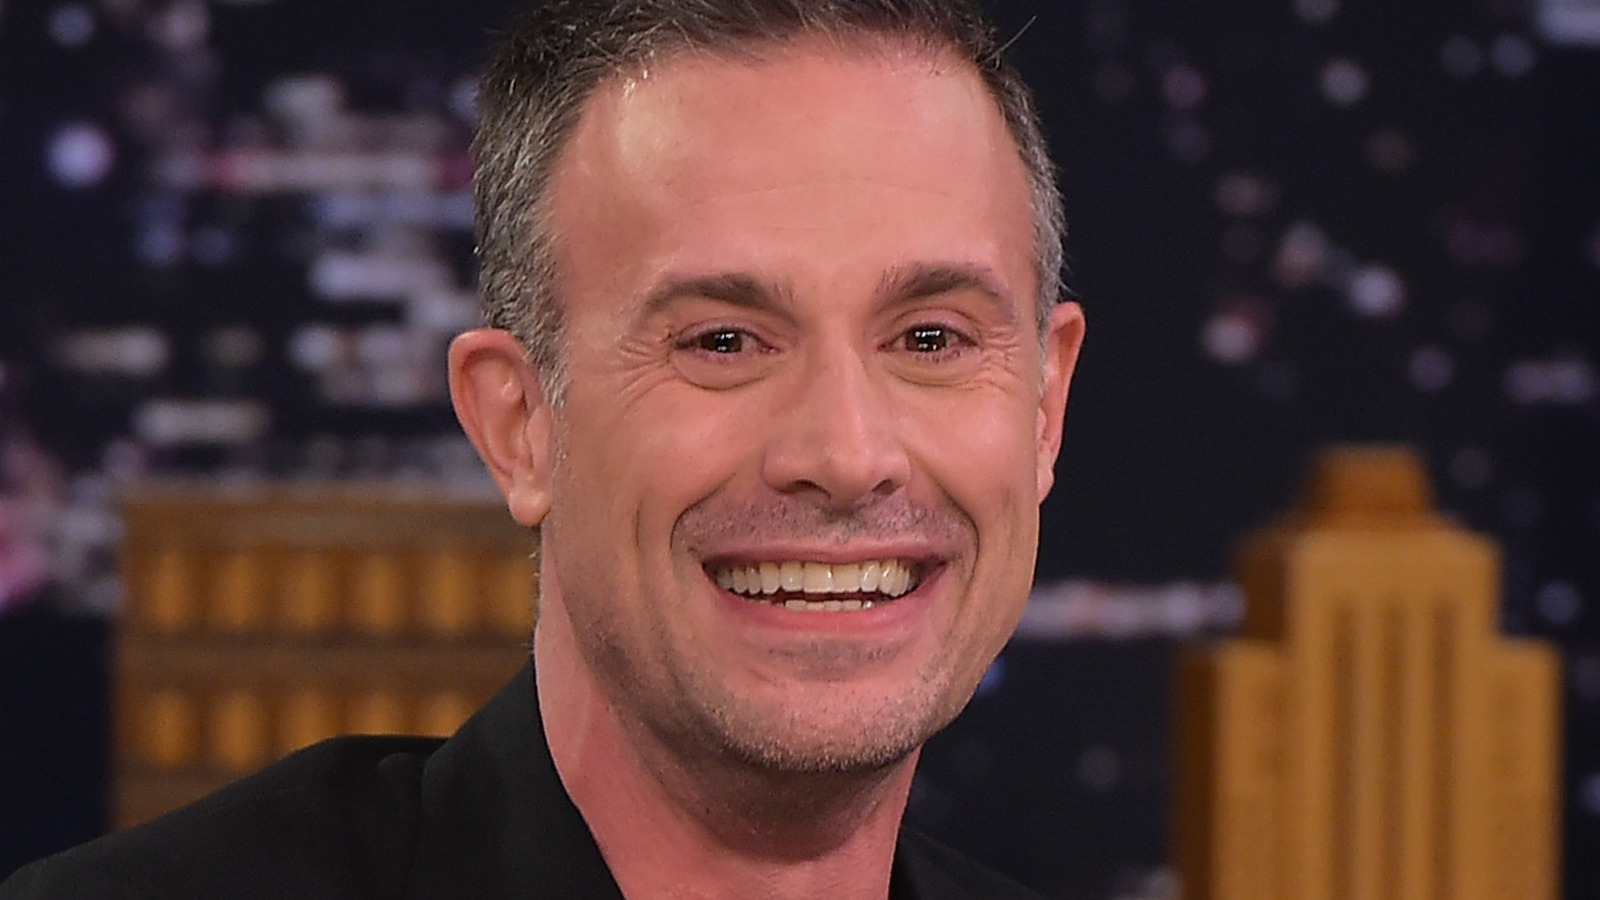 Freddie Prinze Jr. Reveals He Made an Offer to Bray Wyatt to Join His Startup Promotion